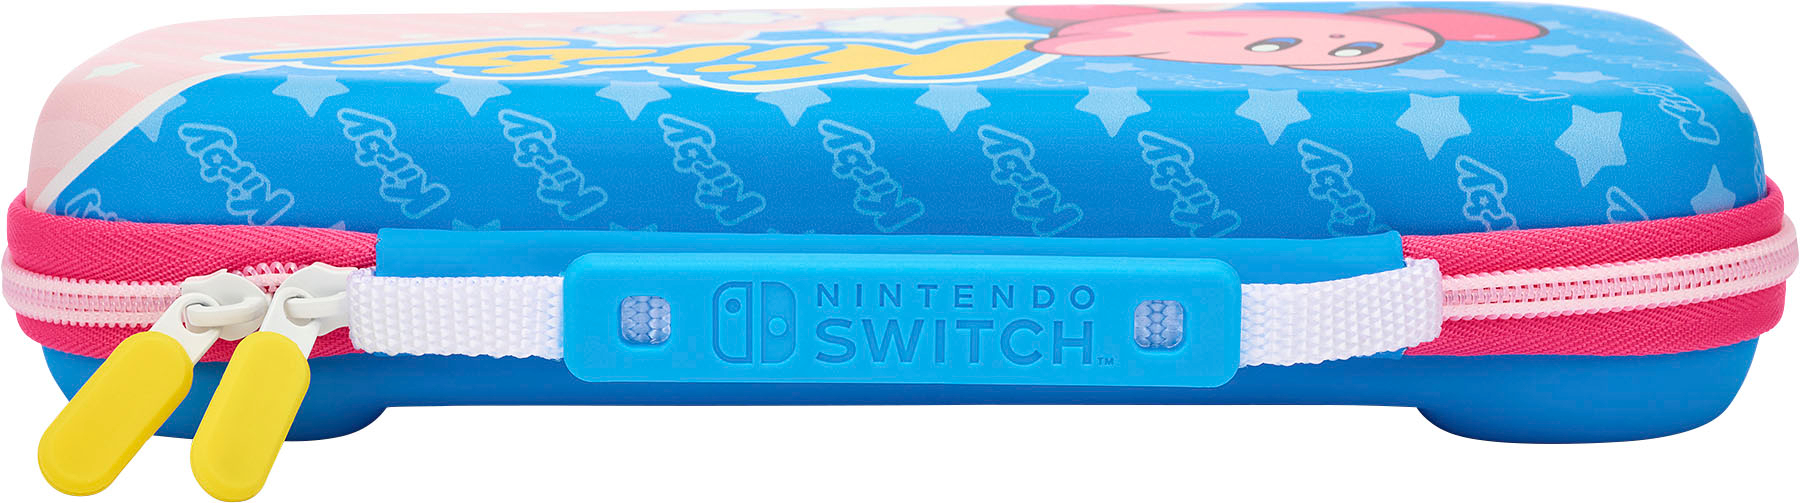 Powera Protection Case For Nintendo Switch Or Nintendo Switch Lite